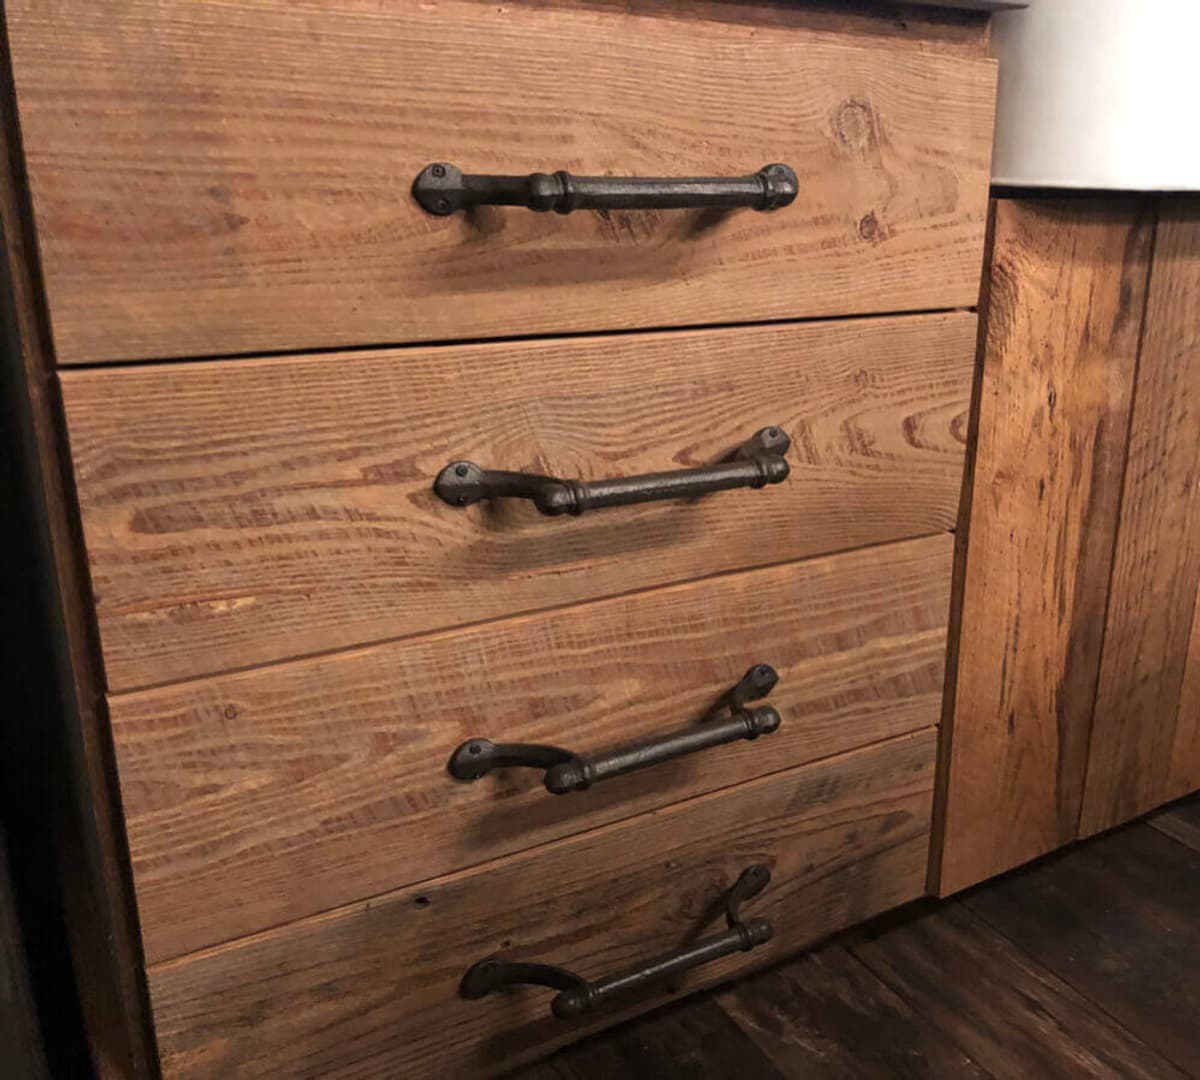 Pine drawers crafted from reclaimed wood.